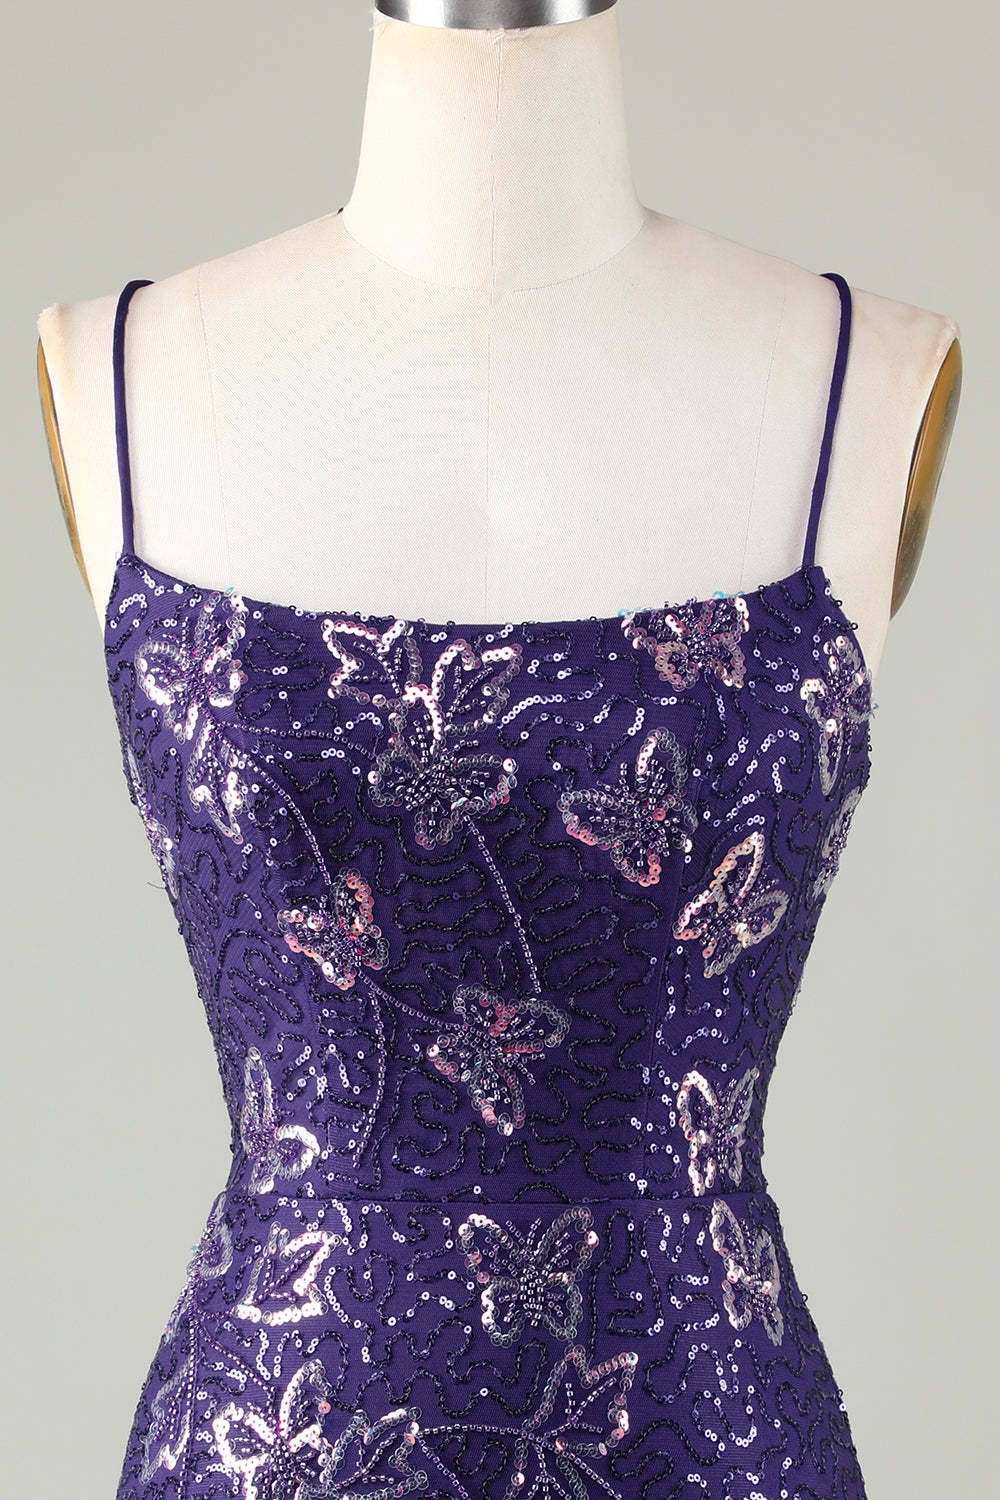 Sparkly Sheath Spaghetti Straps Purple Sequins Short Homecoming Dress with Criss Cross Back